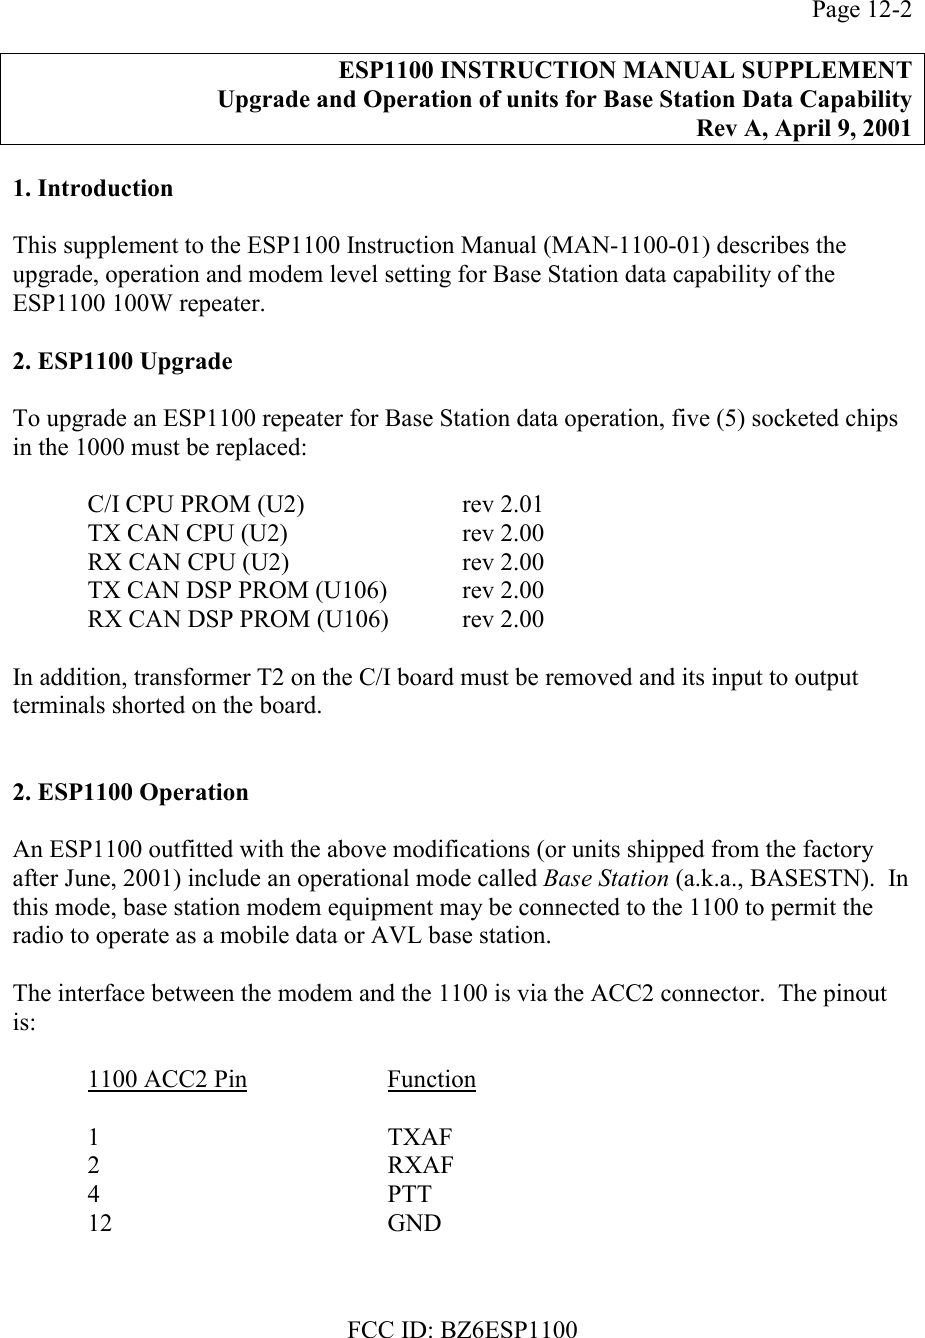 FCC ID: BZ6ESP1100Page 12-2ESP1100 INSTRUCTION MANUAL SUPPLEMENTUpgrade and Operation of units for Base Station Data CapabilityRev A, April 9, 20011. IntroductionThis supplement to the ESP1100 Instruction Manual (MAN-1100-01) describes theupgrade, operation and modem level setting for Base Station data capability of theESP1100 100W repeater.2. ESP1100 UpgradeTo upgrade an ESP1100 repeater for Base Station data operation, five (5) socketed chipsin the 1000 must be replaced:C/I CPU PROM (U2)  rev 2.01TX CAN CPU (U2) rev 2.00RX CAN CPU (U2) rev 2.00TX CAN DSP PROM (U106) rev 2.00RX CAN DSP PROM (U106)  rev 2.00In addition, transformer T2 on the C/I board must be removed and its input to outputterminals shorted on the board.2. ESP1100 OperationAn ESP1100 outfitted with the above modifications (or units shipped from the factoryafter June, 2001) include an operational mode called Base Station (a.k.a., BASESTN).  Inthis mode, base station modem equipment may be connected to the 1100 to permit theradio to operate as a mobile data or AVL base station.The interface between the modem and the 1100 is via the ACC2 connector.  The pinoutis:1100 ACC2 Pin Function1 TXAF2 RXAF4PTT12 GND